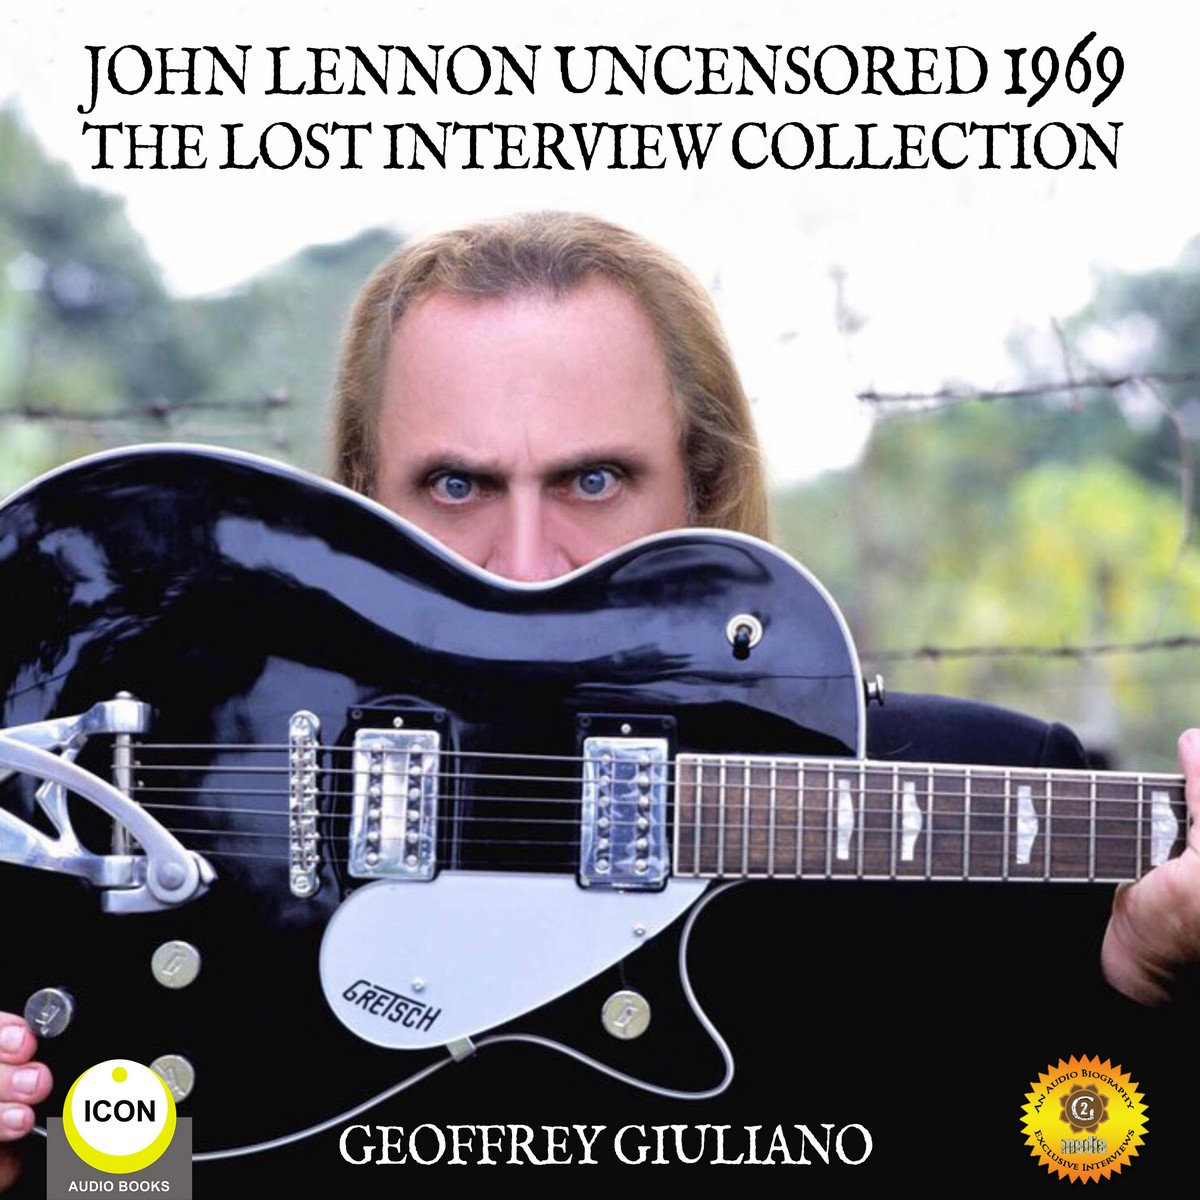 John Lennon Uncensored 1969 The Lost Interview Collection